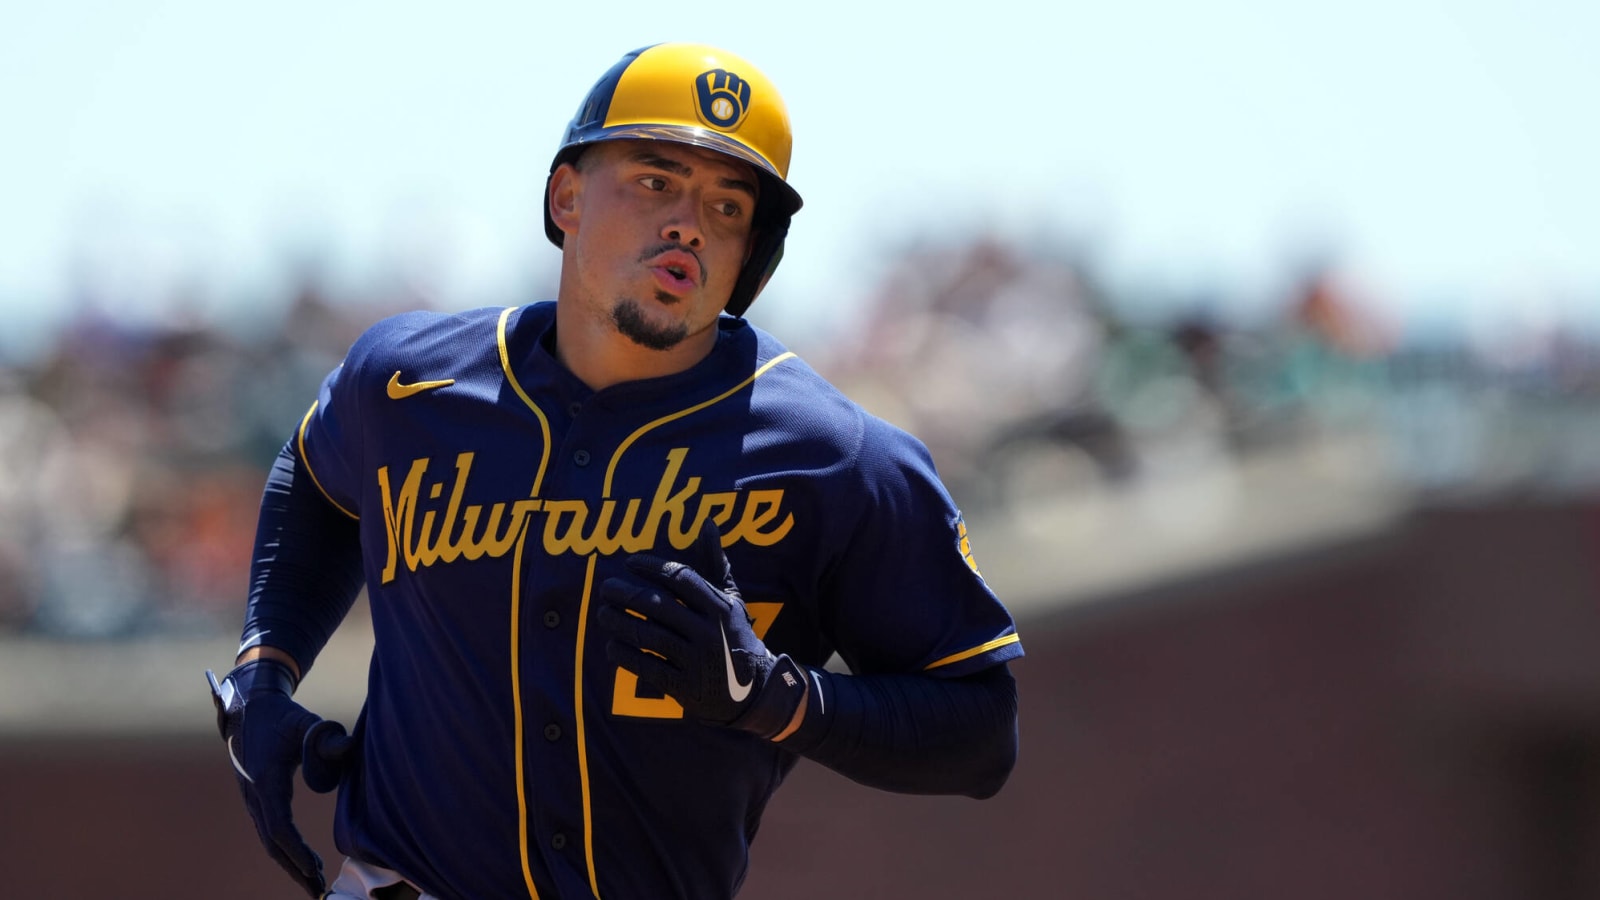 Willy Adames has cemented his place in Brewers history with home run milestone